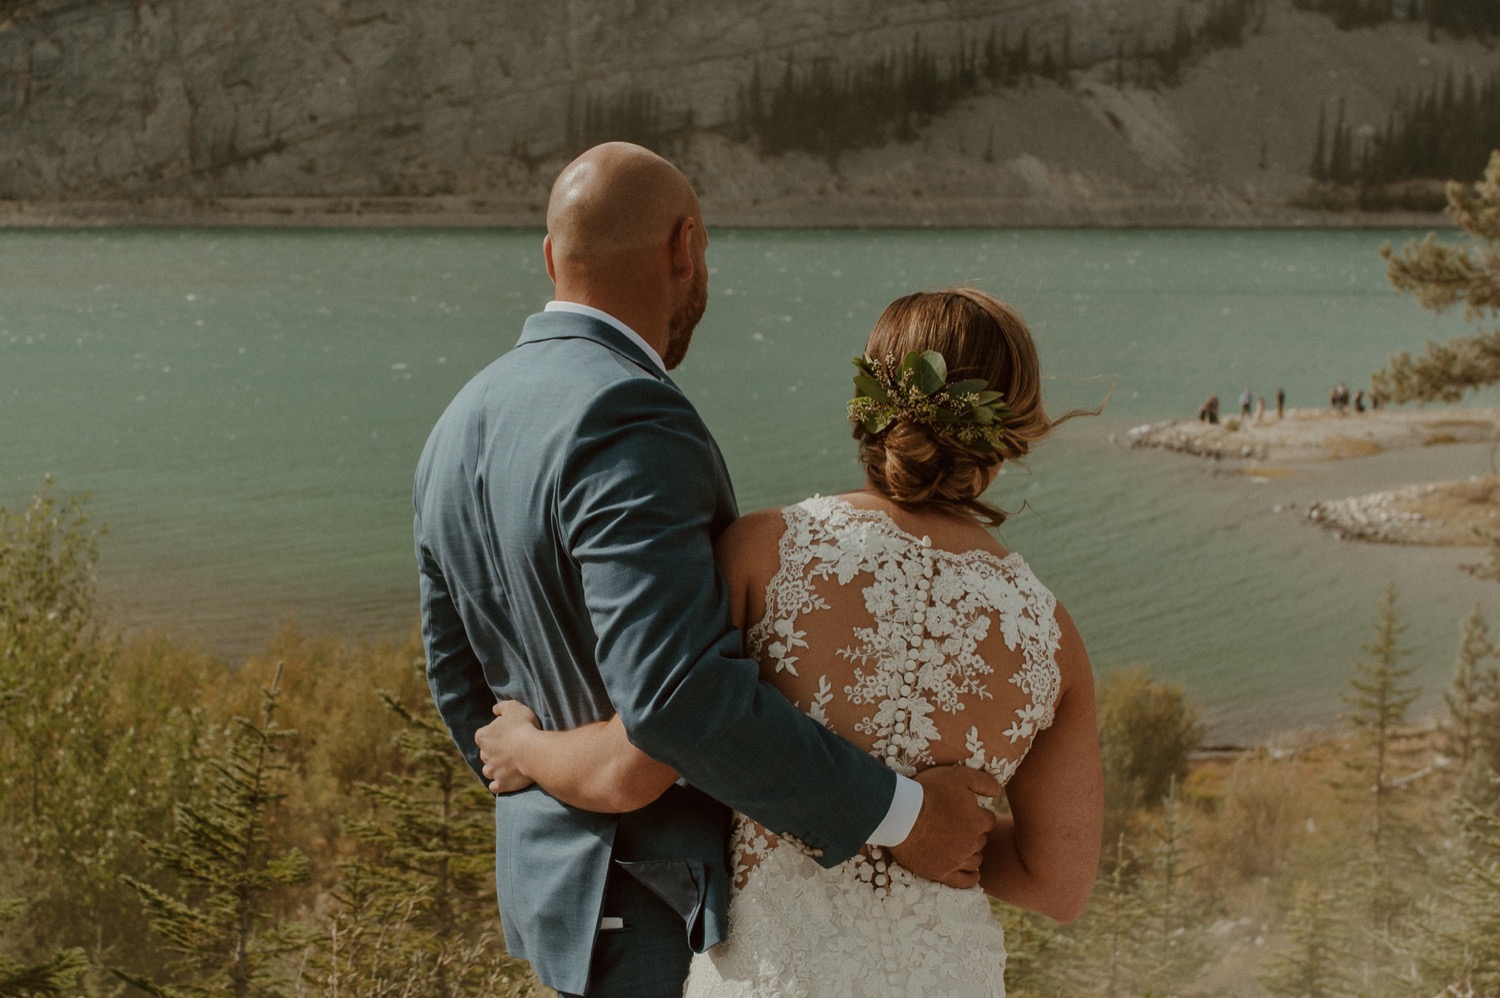 The bride and groom read private letters they wrote to each other before their elopement ceremony with family and friends in Kananaskis Alberta